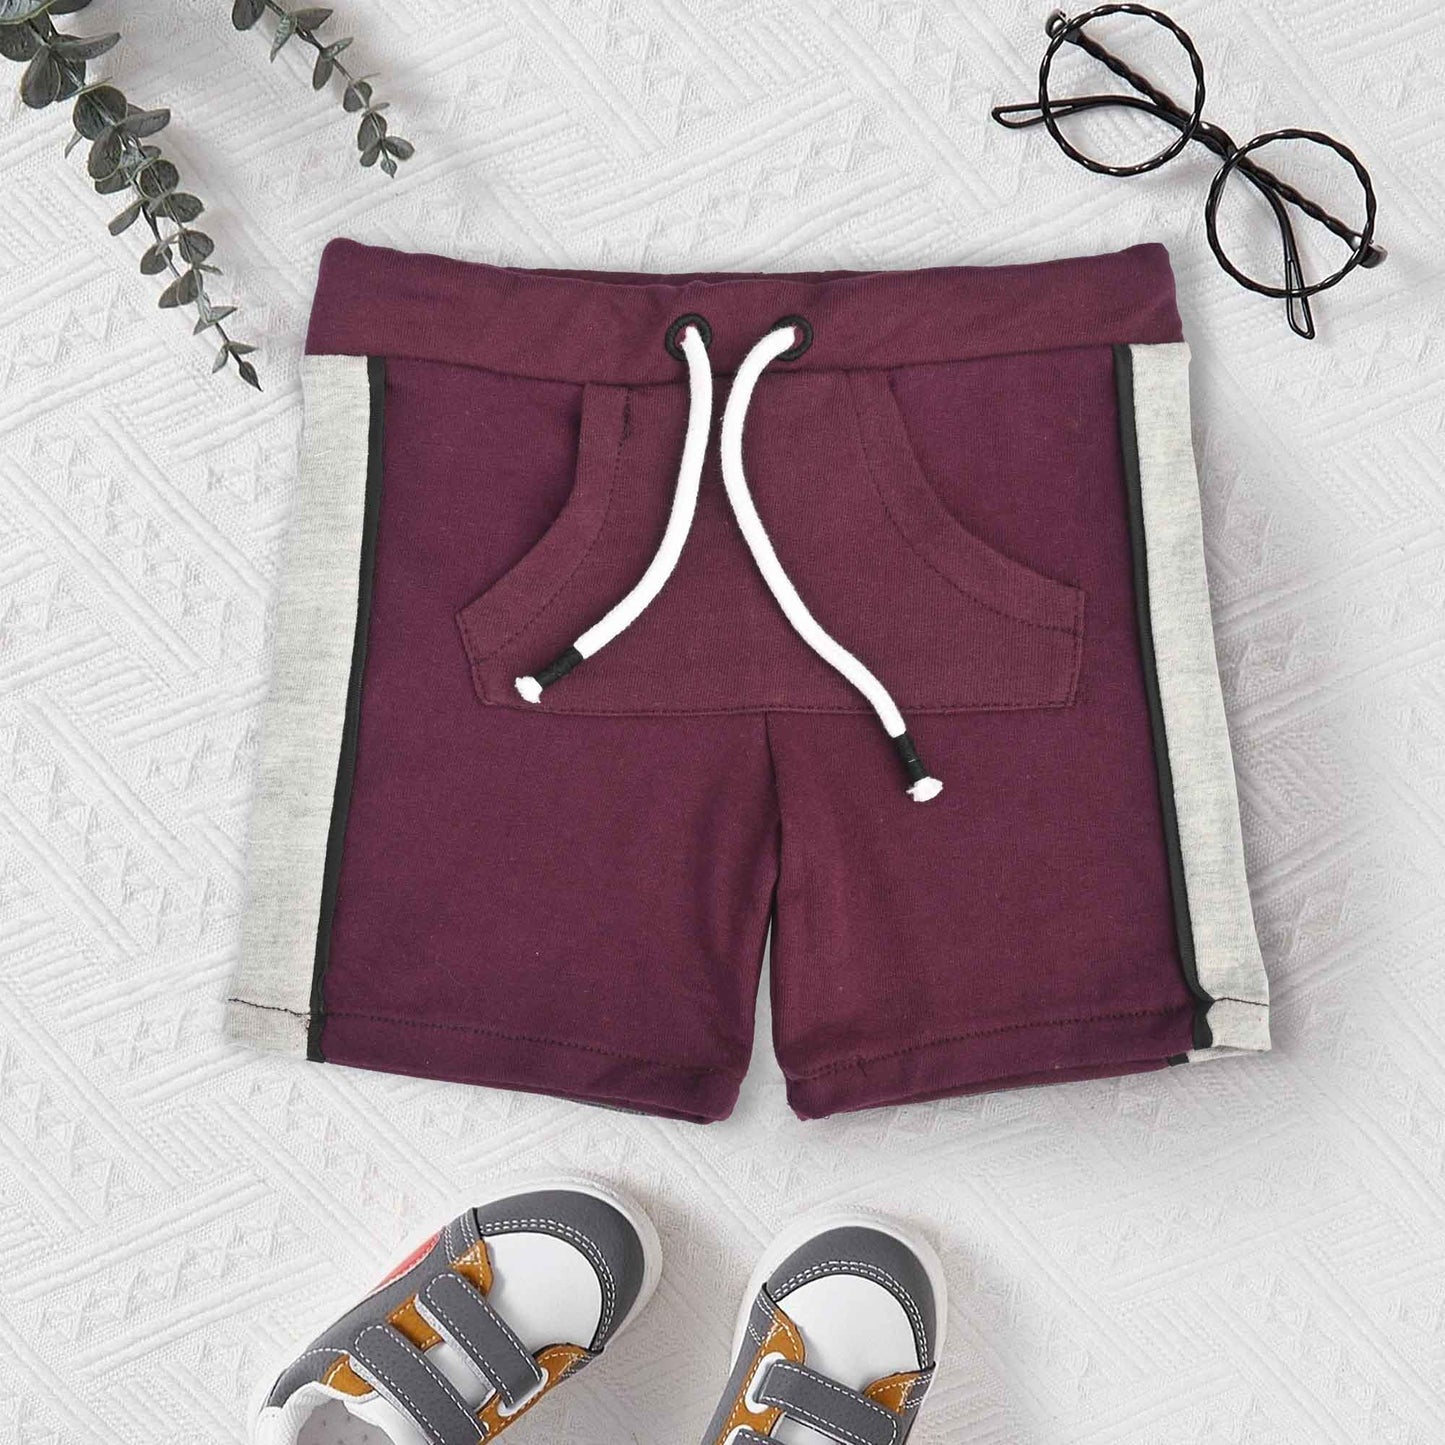 Little Junior Kid's Piping Style Terry Shorts Kid's Shorts SNR Plum 6-9 Months 